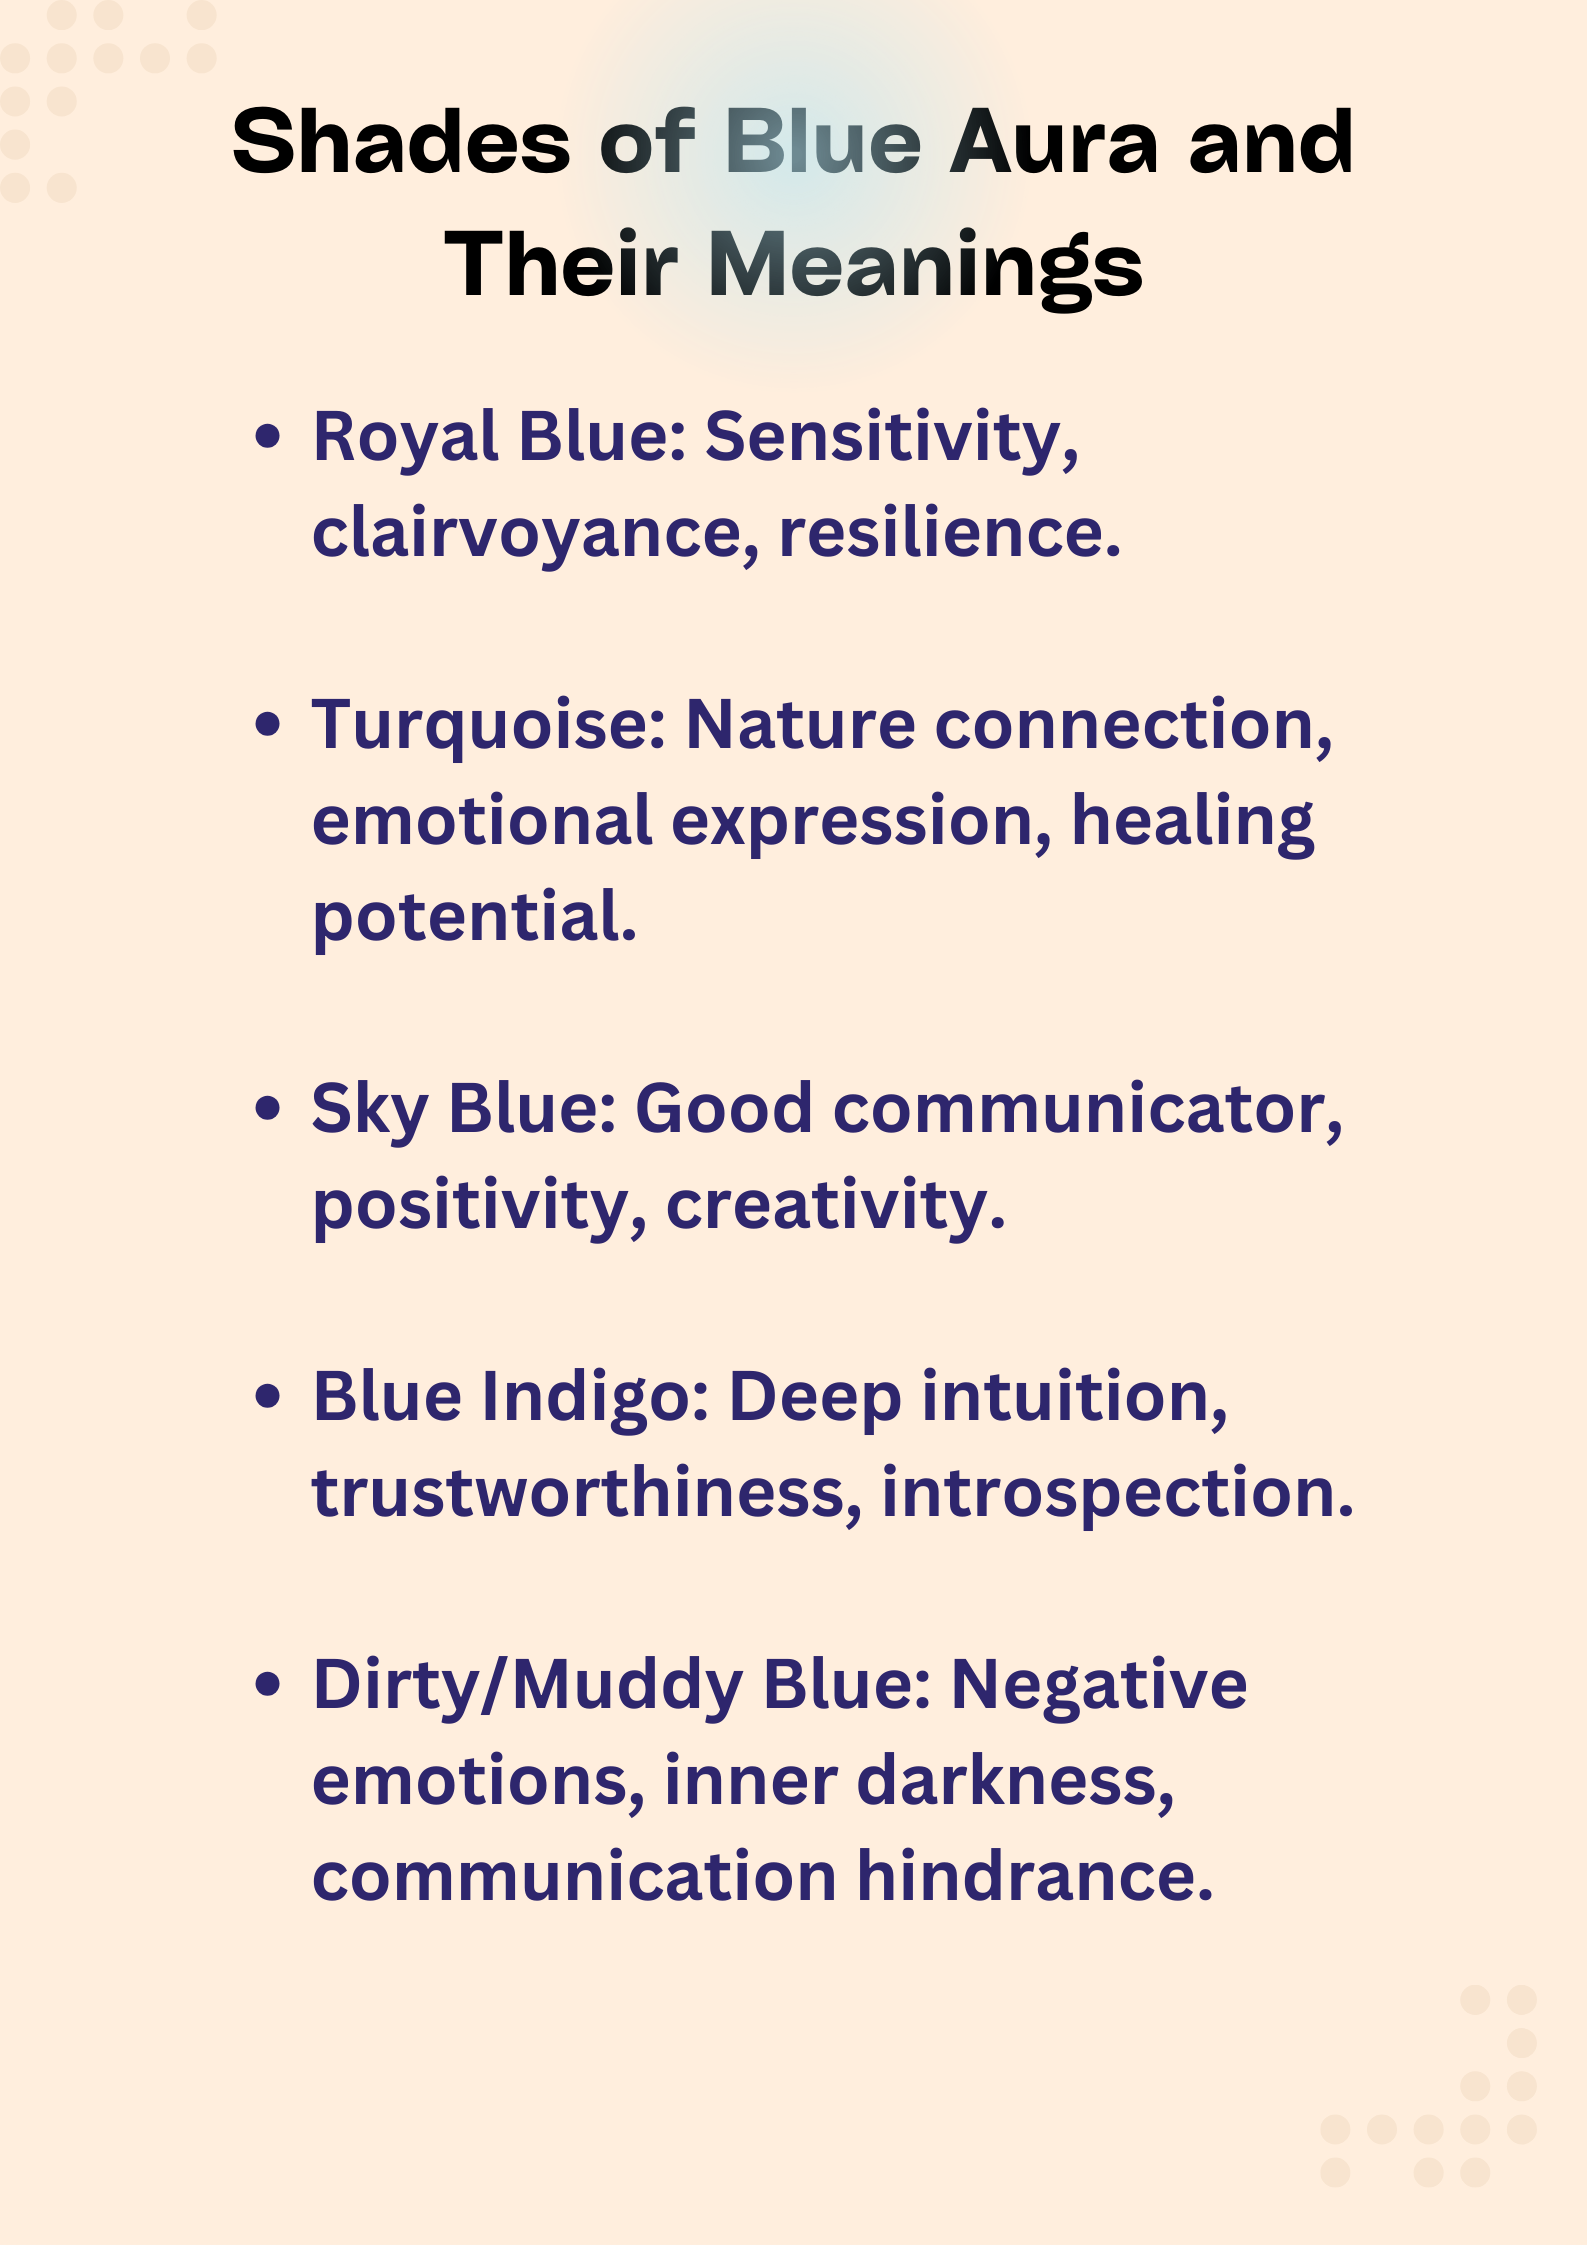 Shades of Blue Aura and Their Meanings